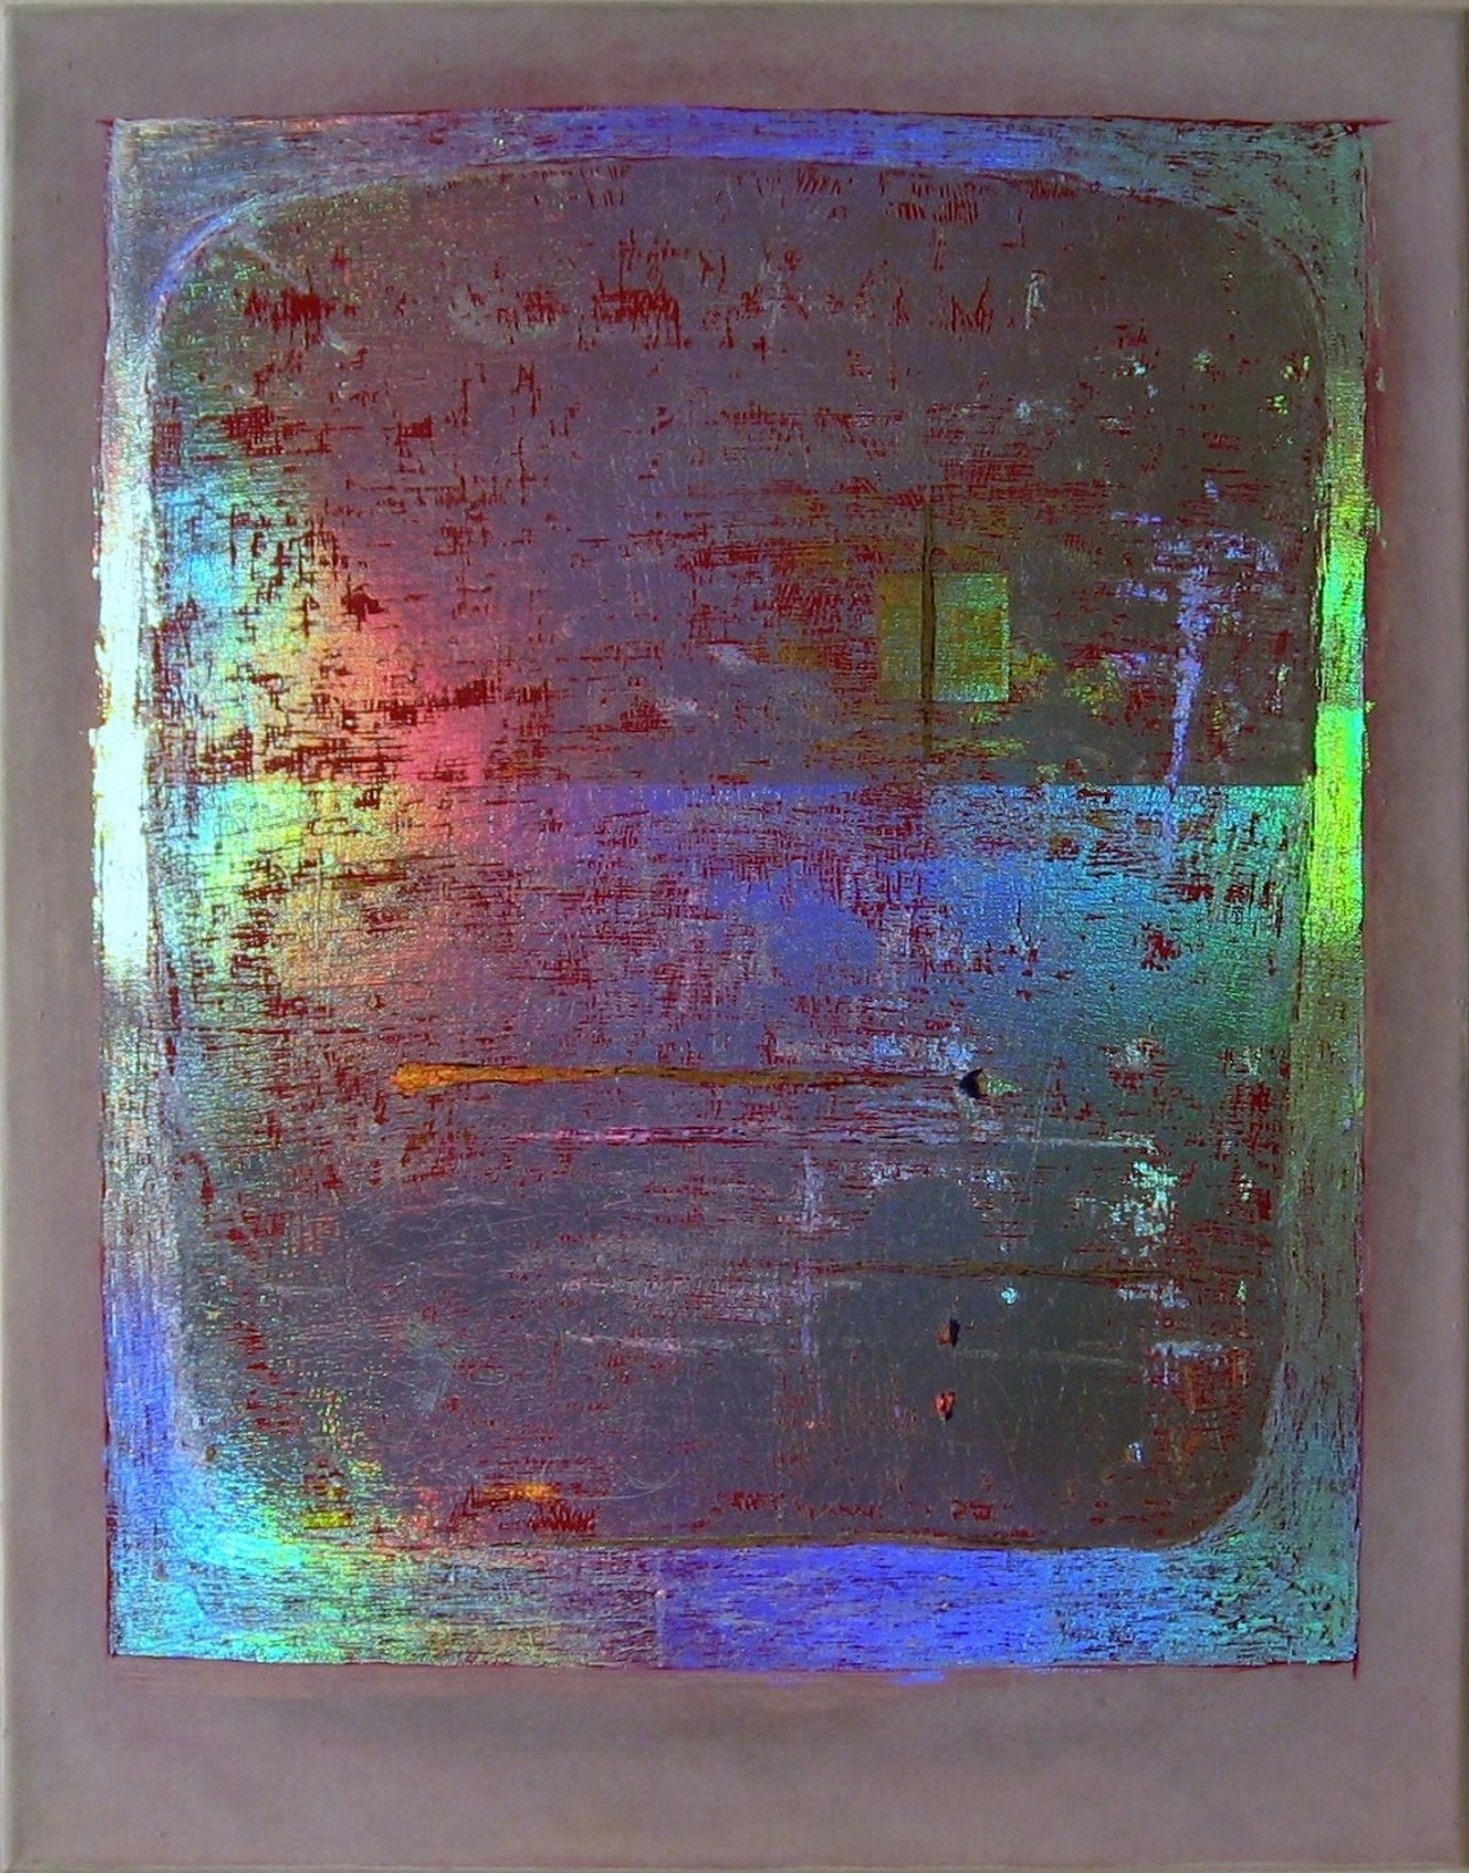 [15b.jpg - Christiane Grasse: Painted Light, Series Silver - 70x80 cm, mixedmedia, acryl, holographic silver on canvas]